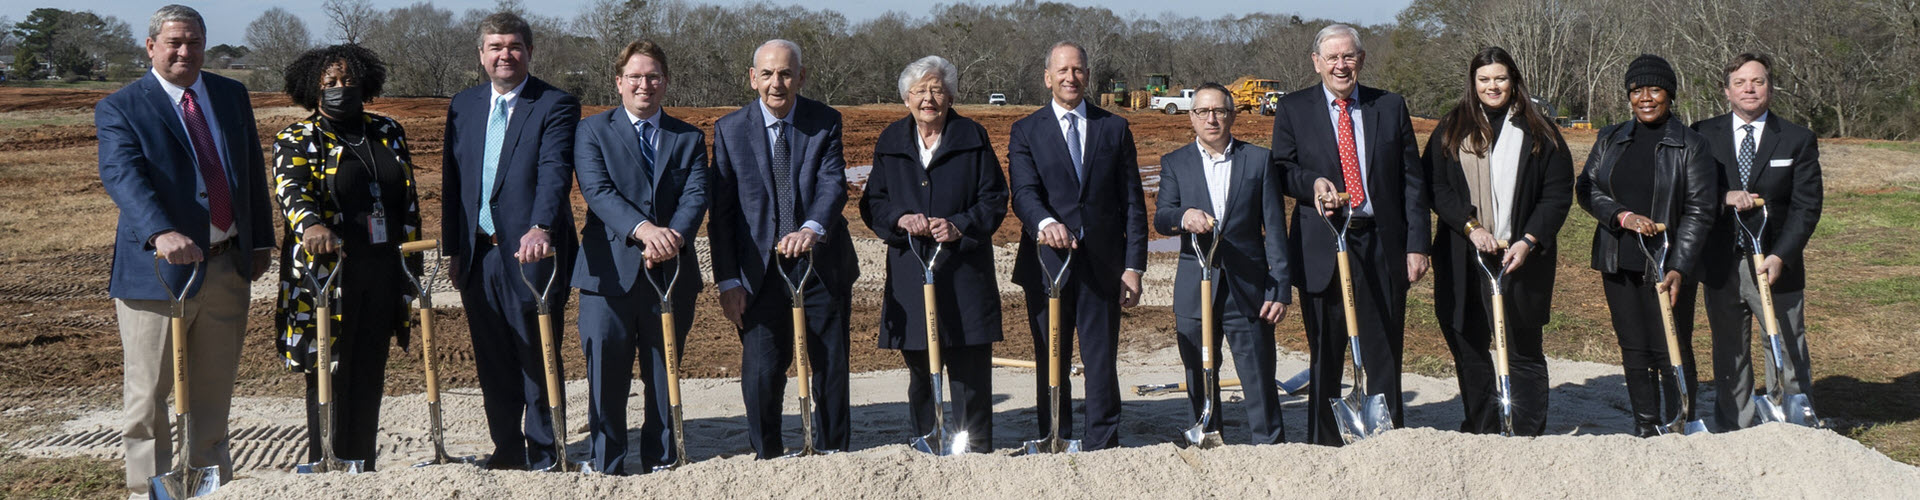 Conecuh Ridge Distillery - The Home of Clyde May's Whiskey Groundbreaking, Monday January 24, 2022